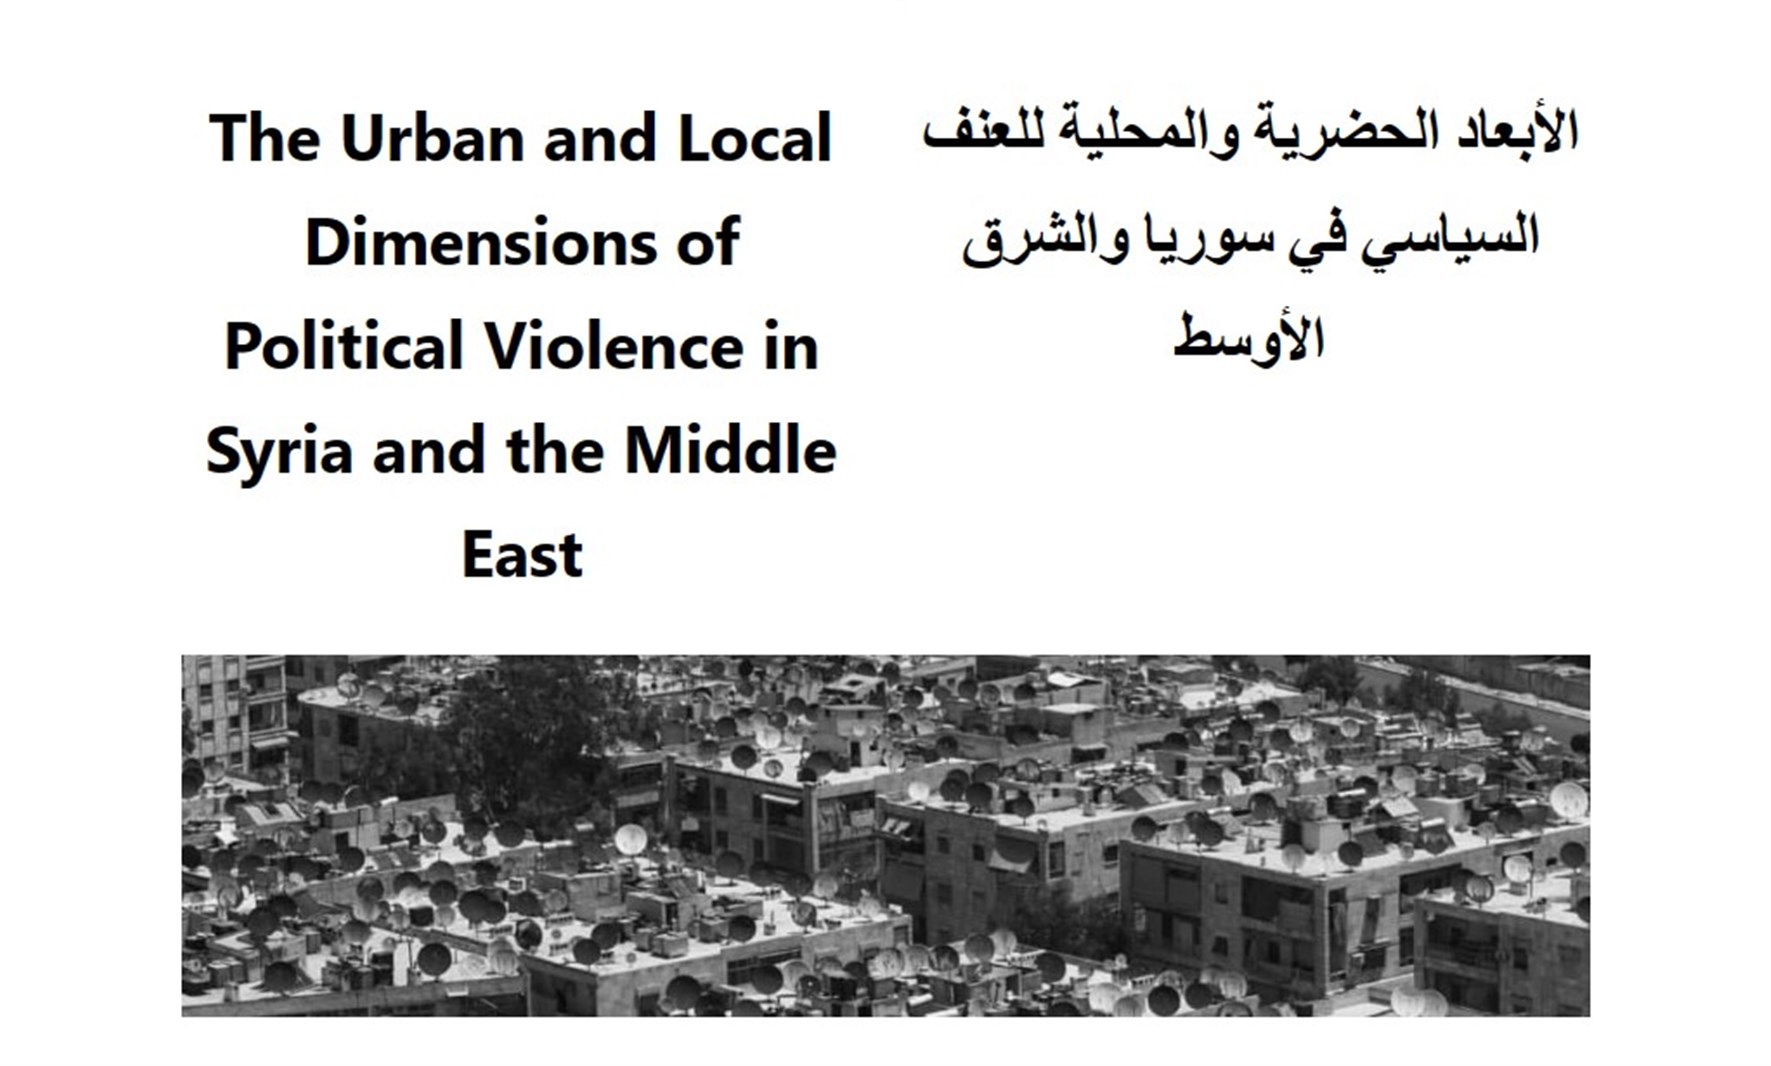 The Urban and Local Dimensions of Political Violence in Syria and the Middle East